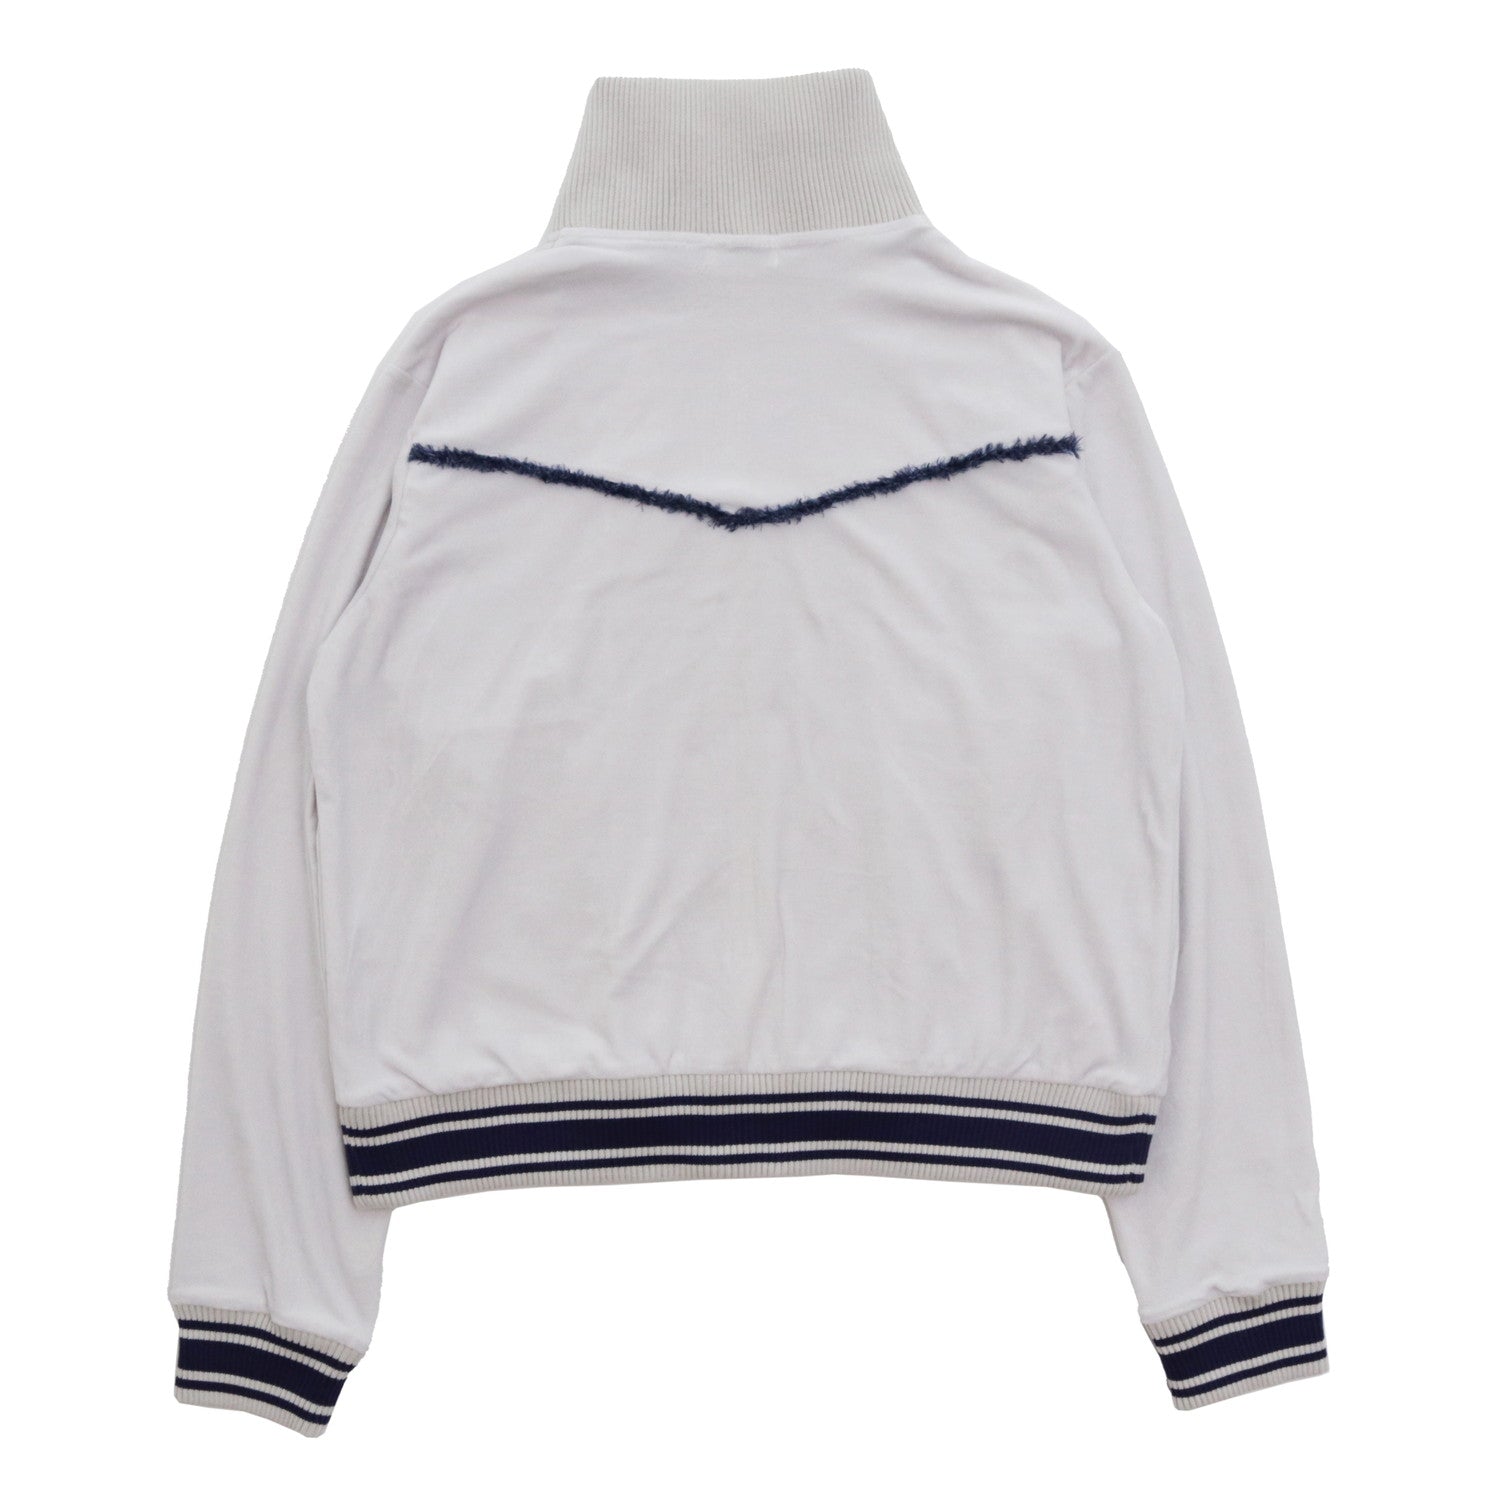 Track Jacket #White [LB233-BL04] - LITTLEBIG（リトルビッグ）23aw